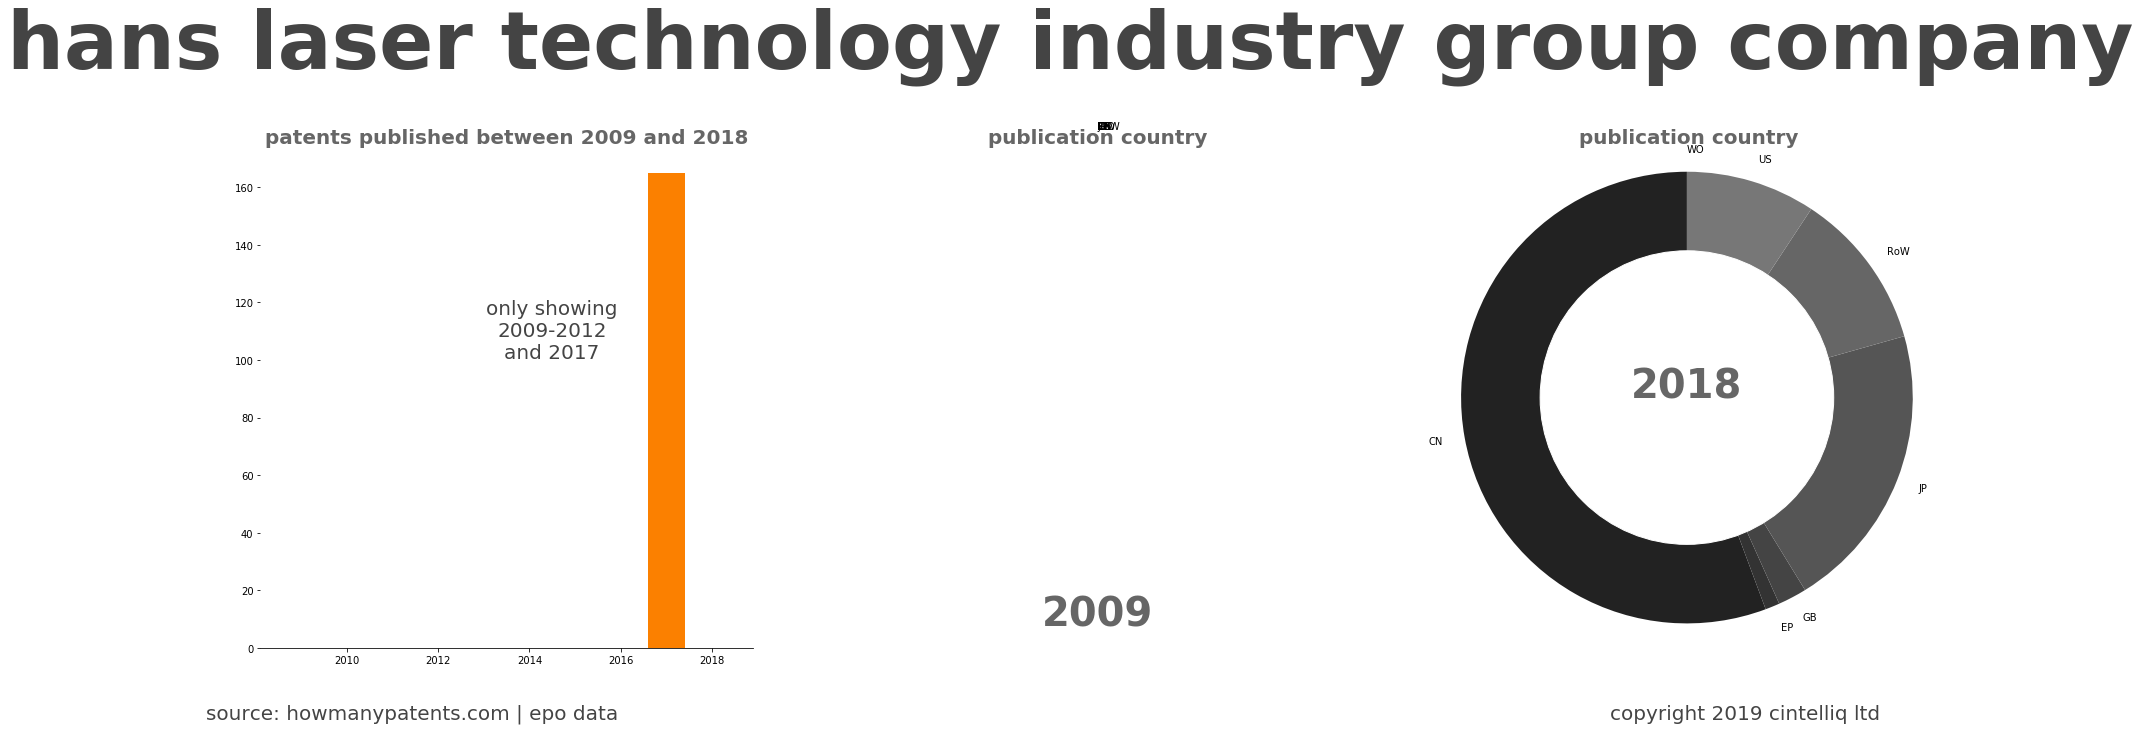 summary of patents for Hans Laser Technology Industry Group Company